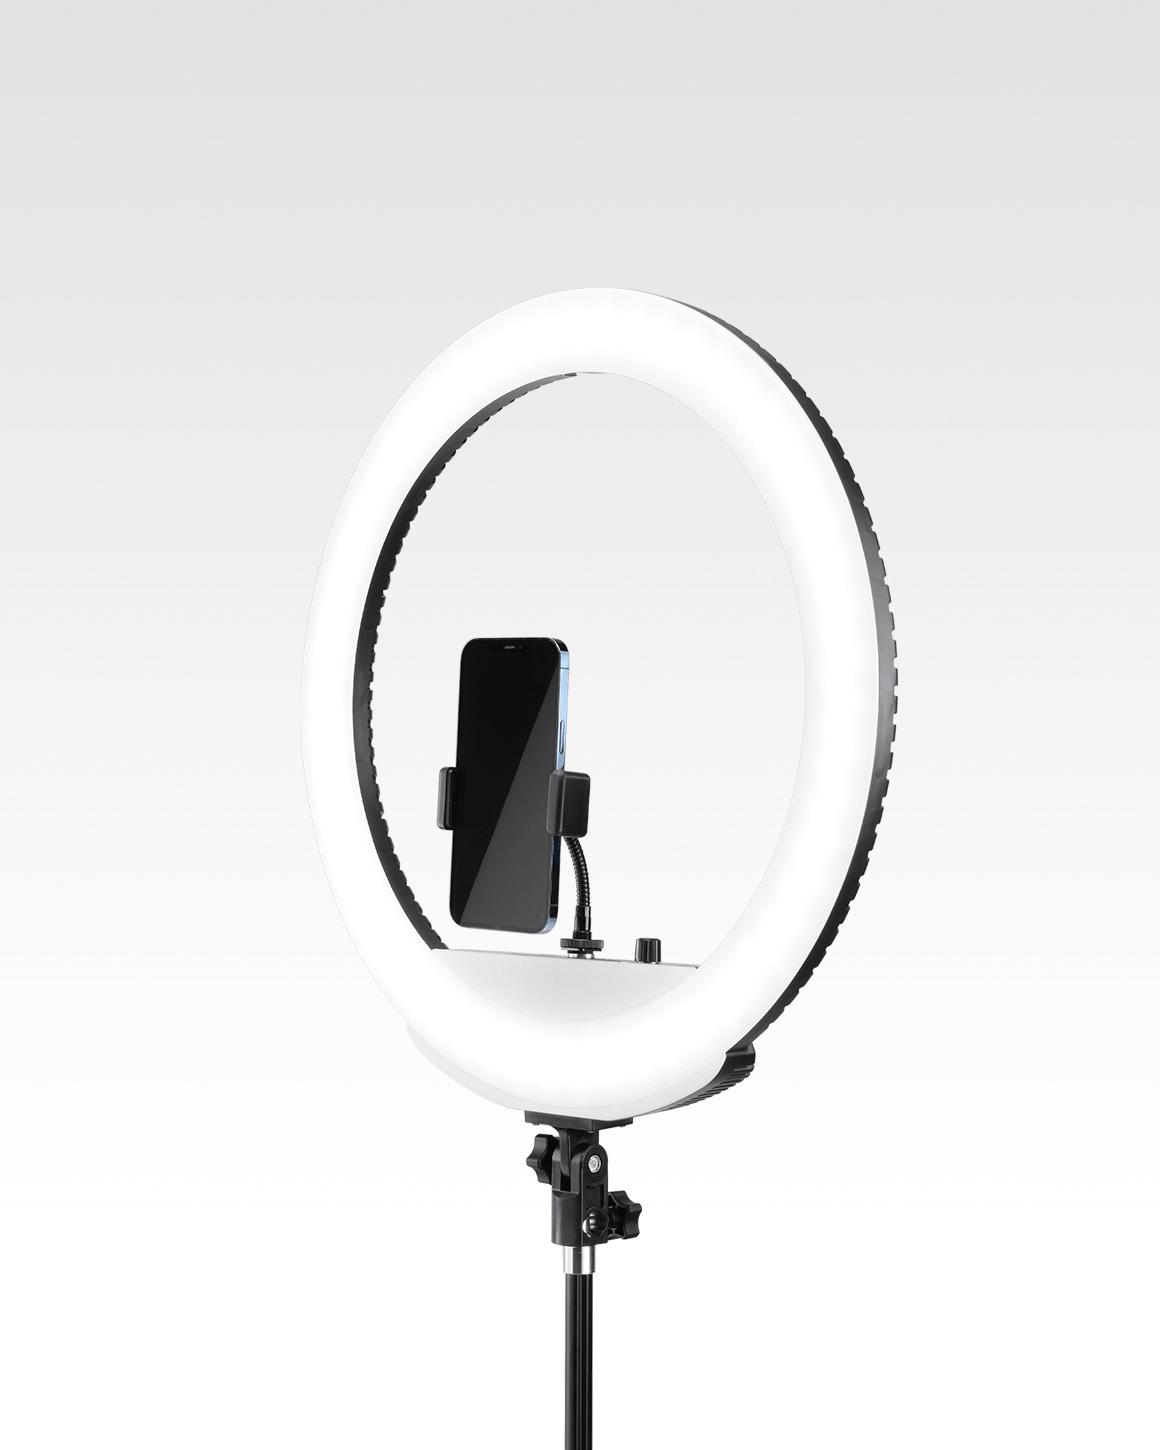 Ring Light: 18" Portable LED Ring Light with Stand